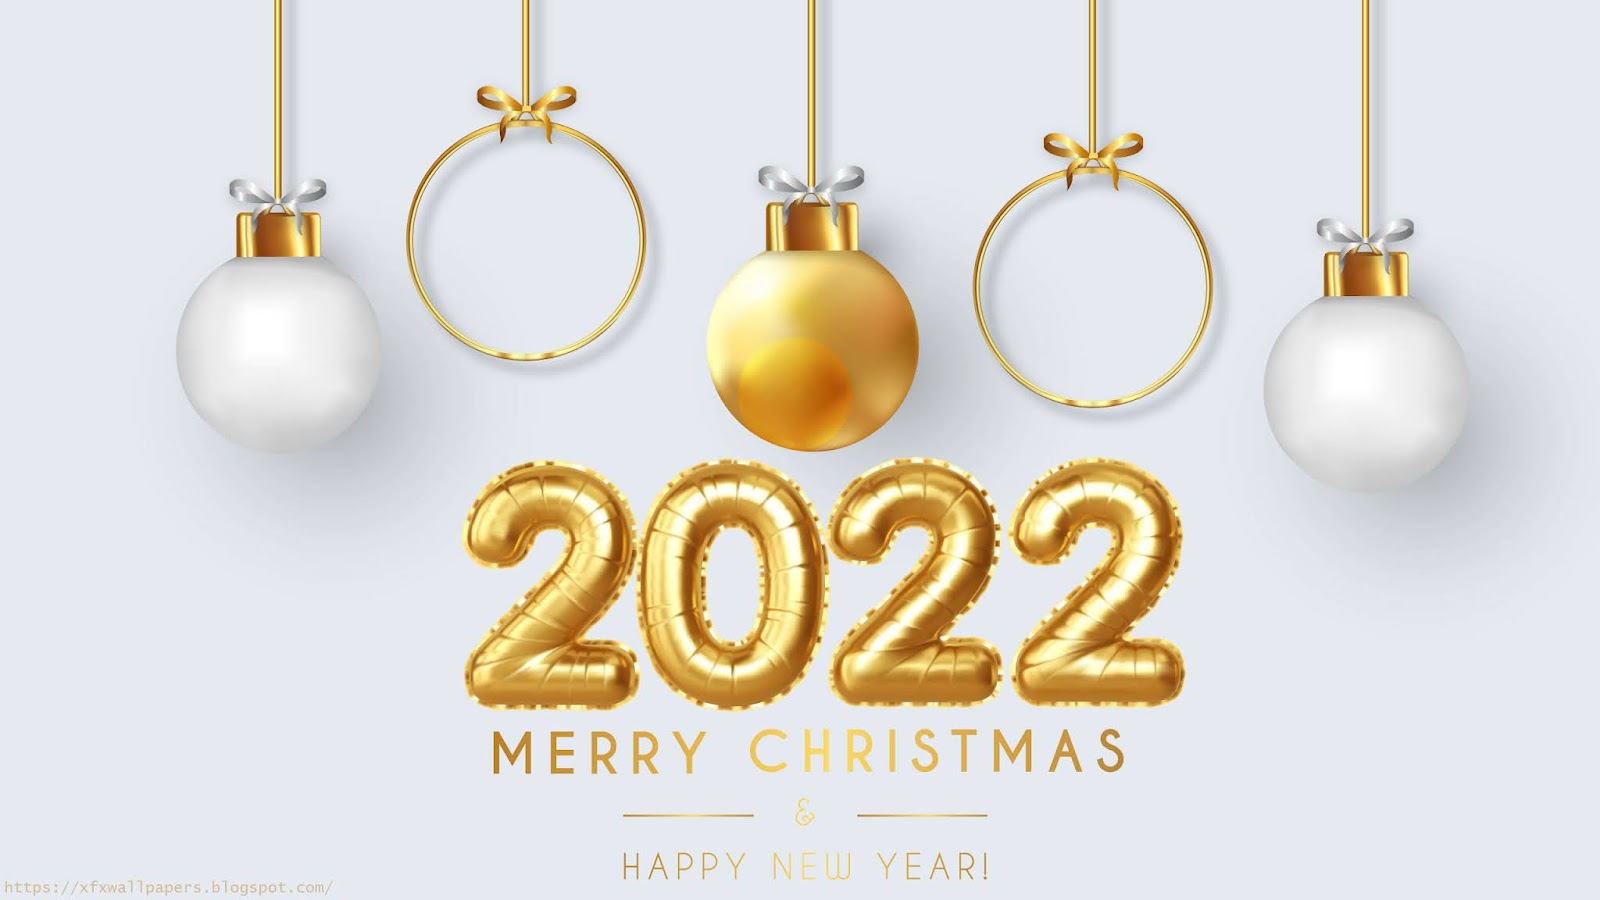 Merry Christmas And Happy New Year 2022 1600x900